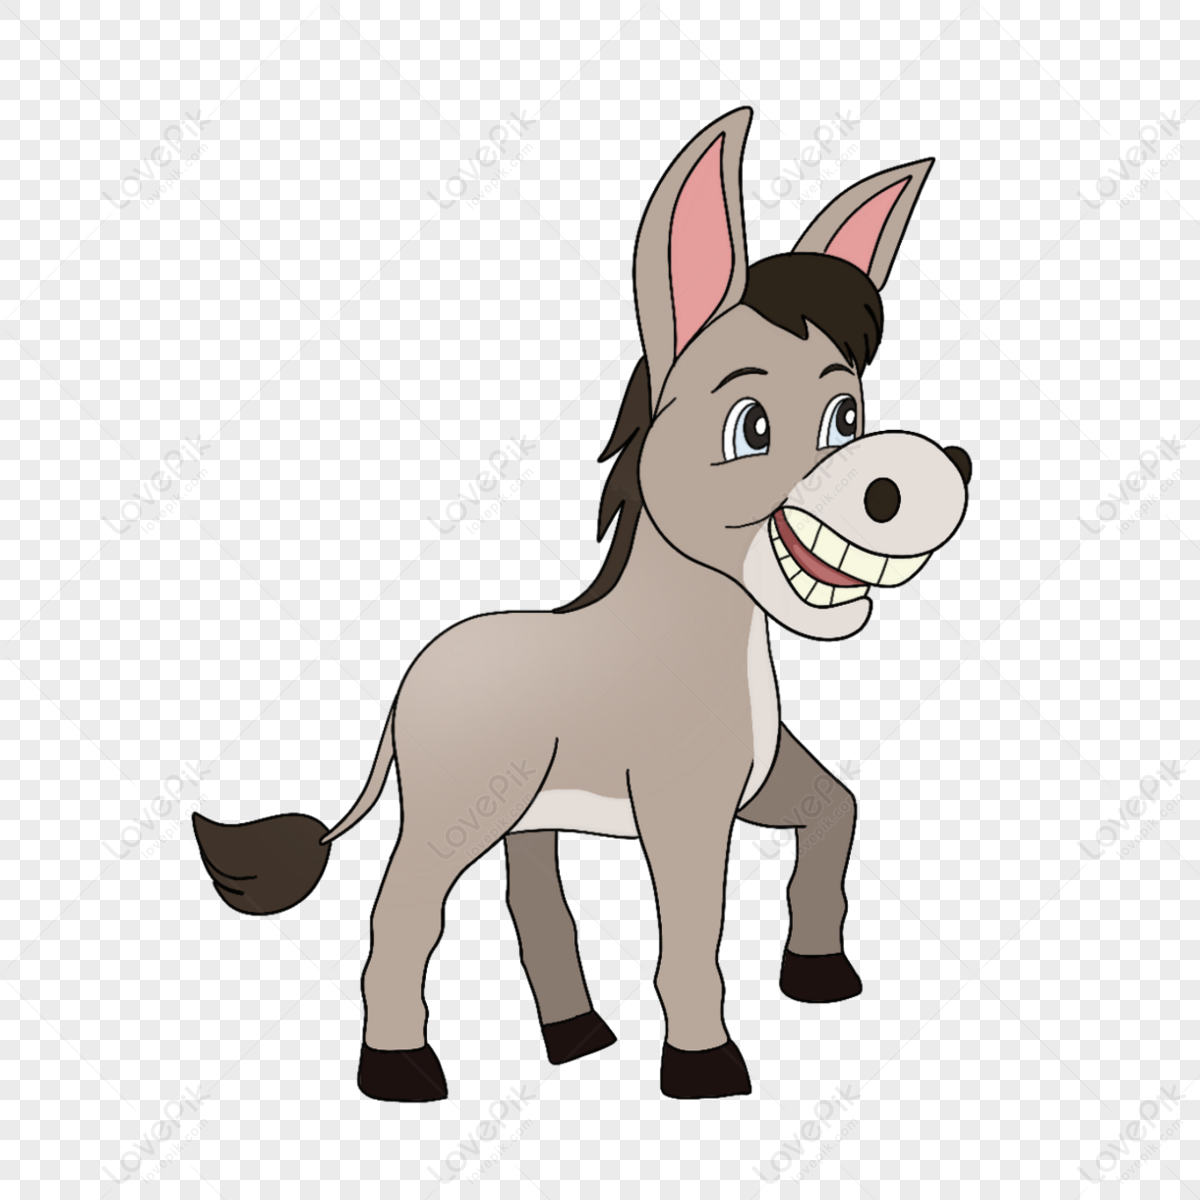 Donkey PNG Images, Donkey Clipart, Little Donkey PNG Transparent Background  - Pngtree